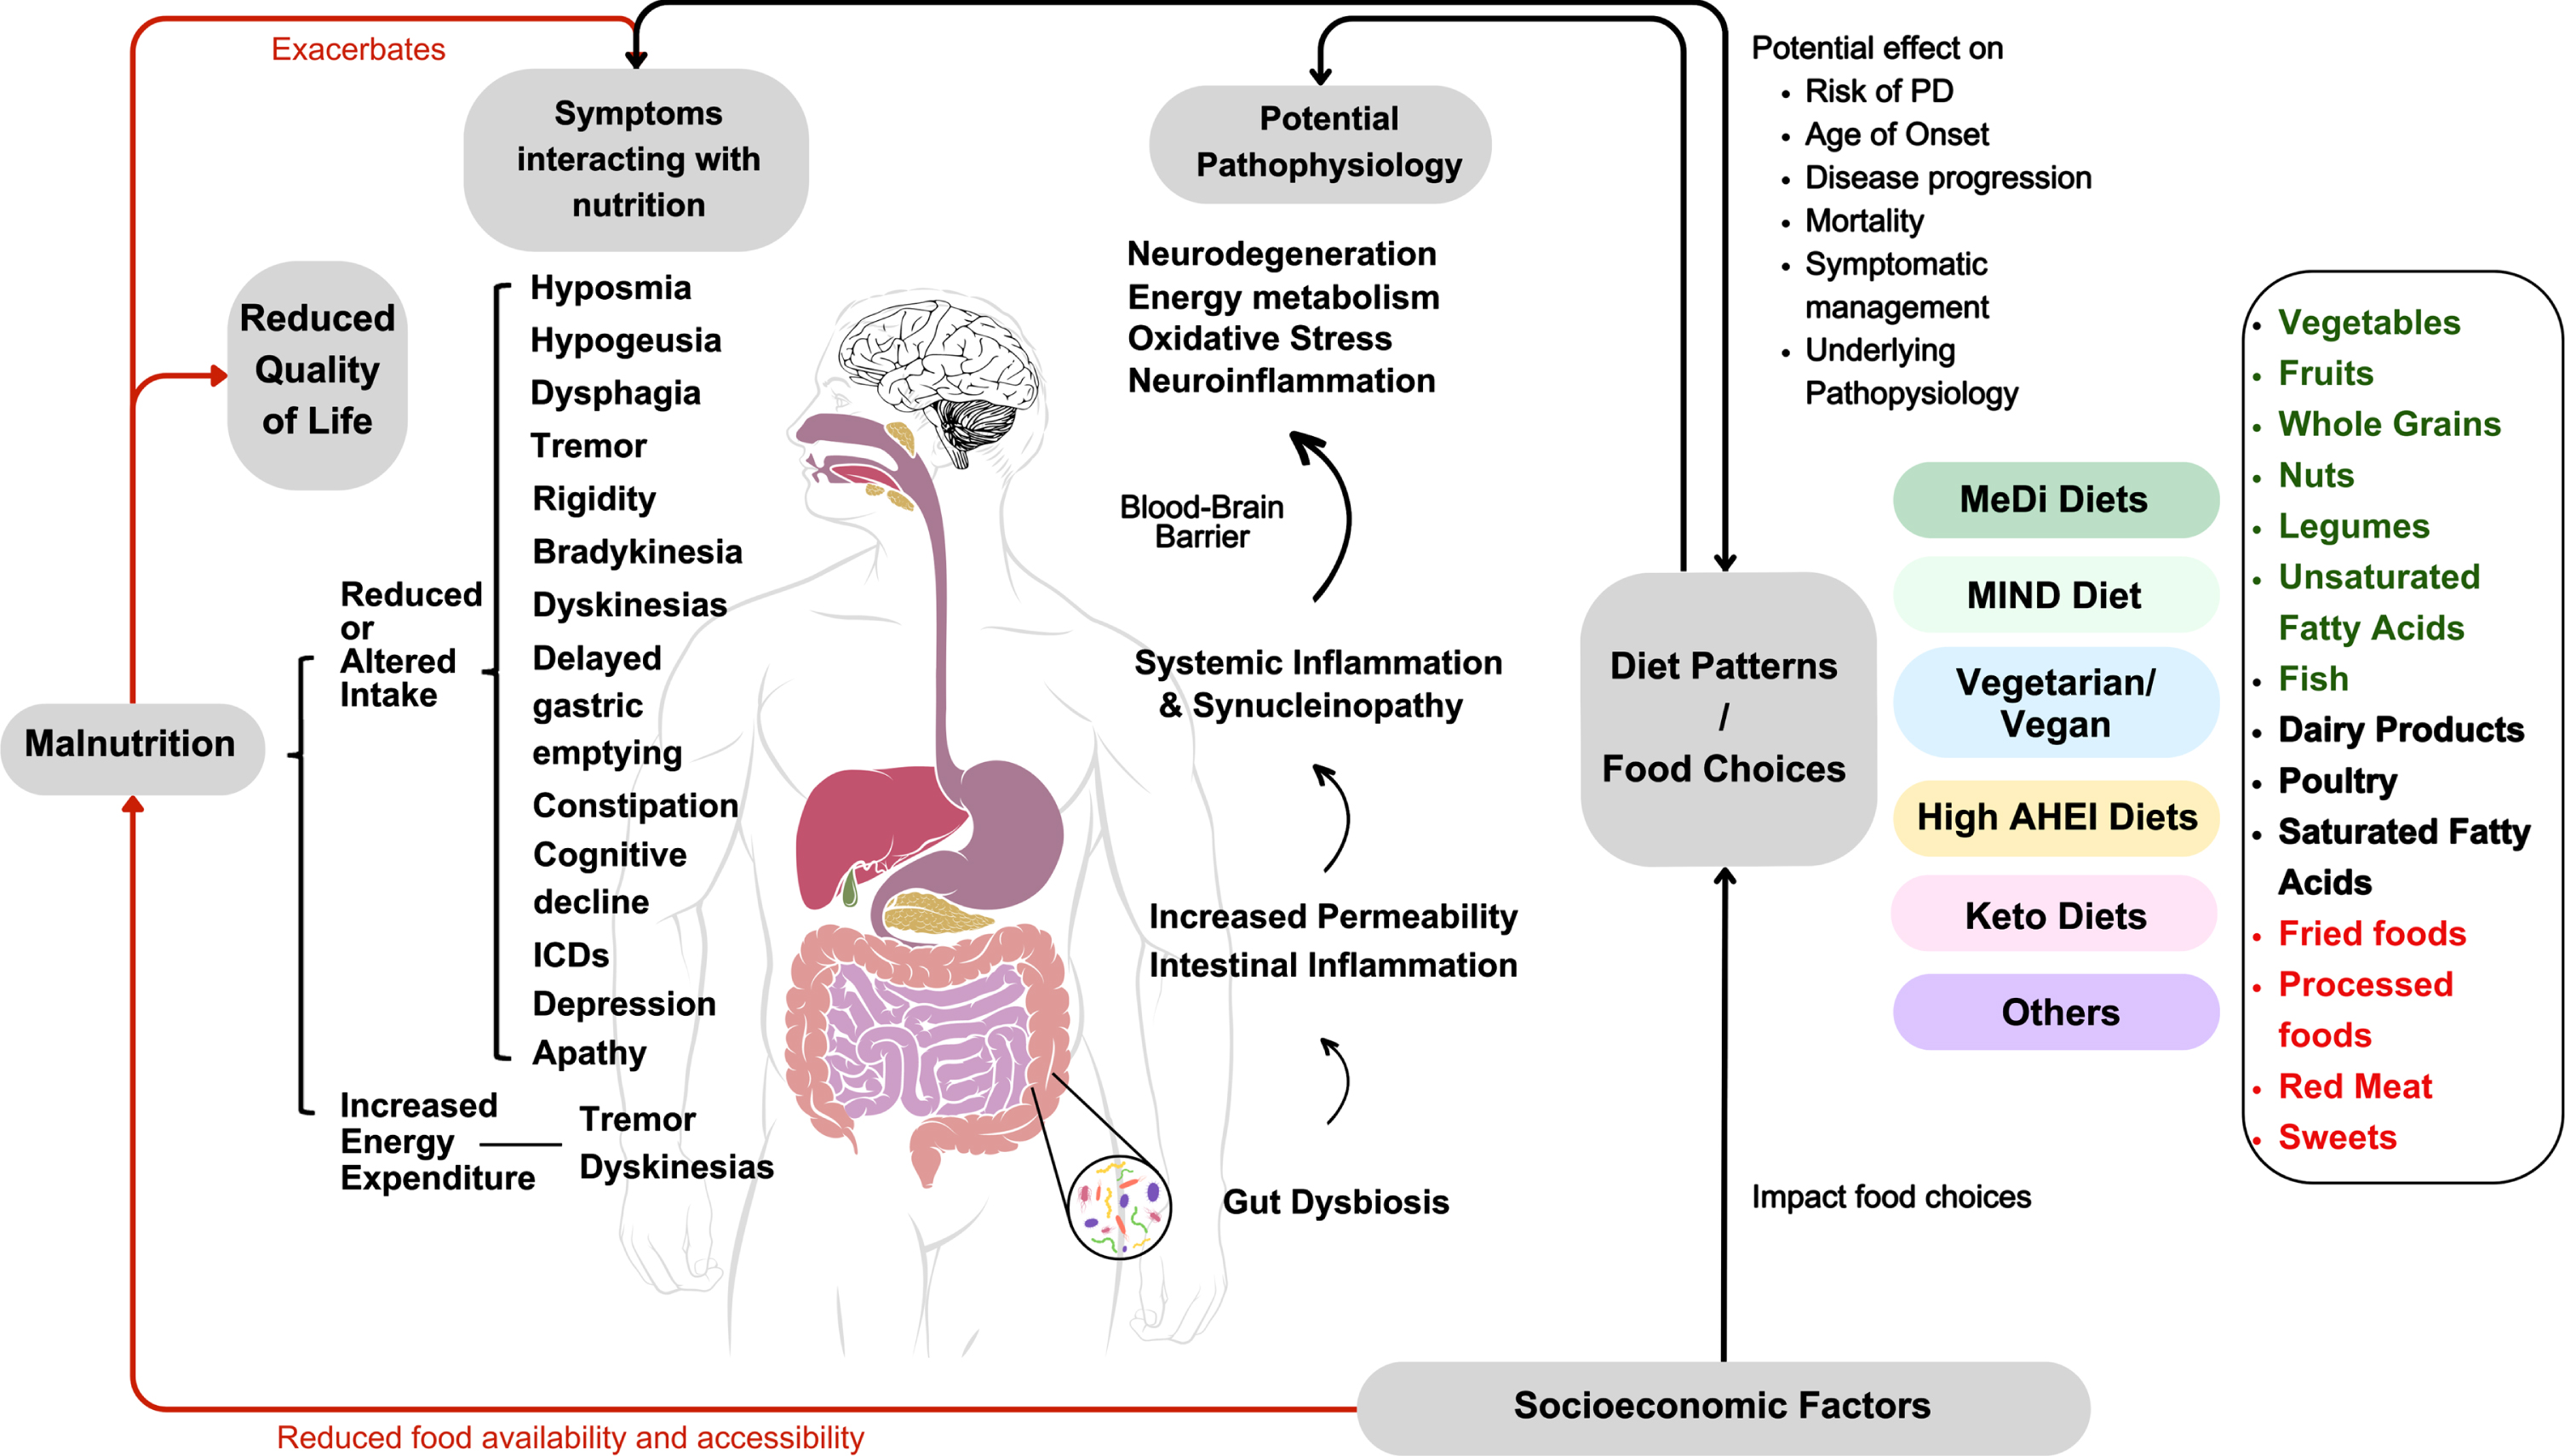 Summary of the complex interactions of dietary patterns and food choices with socioeconomic factors, PD-related malnutrition, disease pathophysiology, symptoms and quality of life.